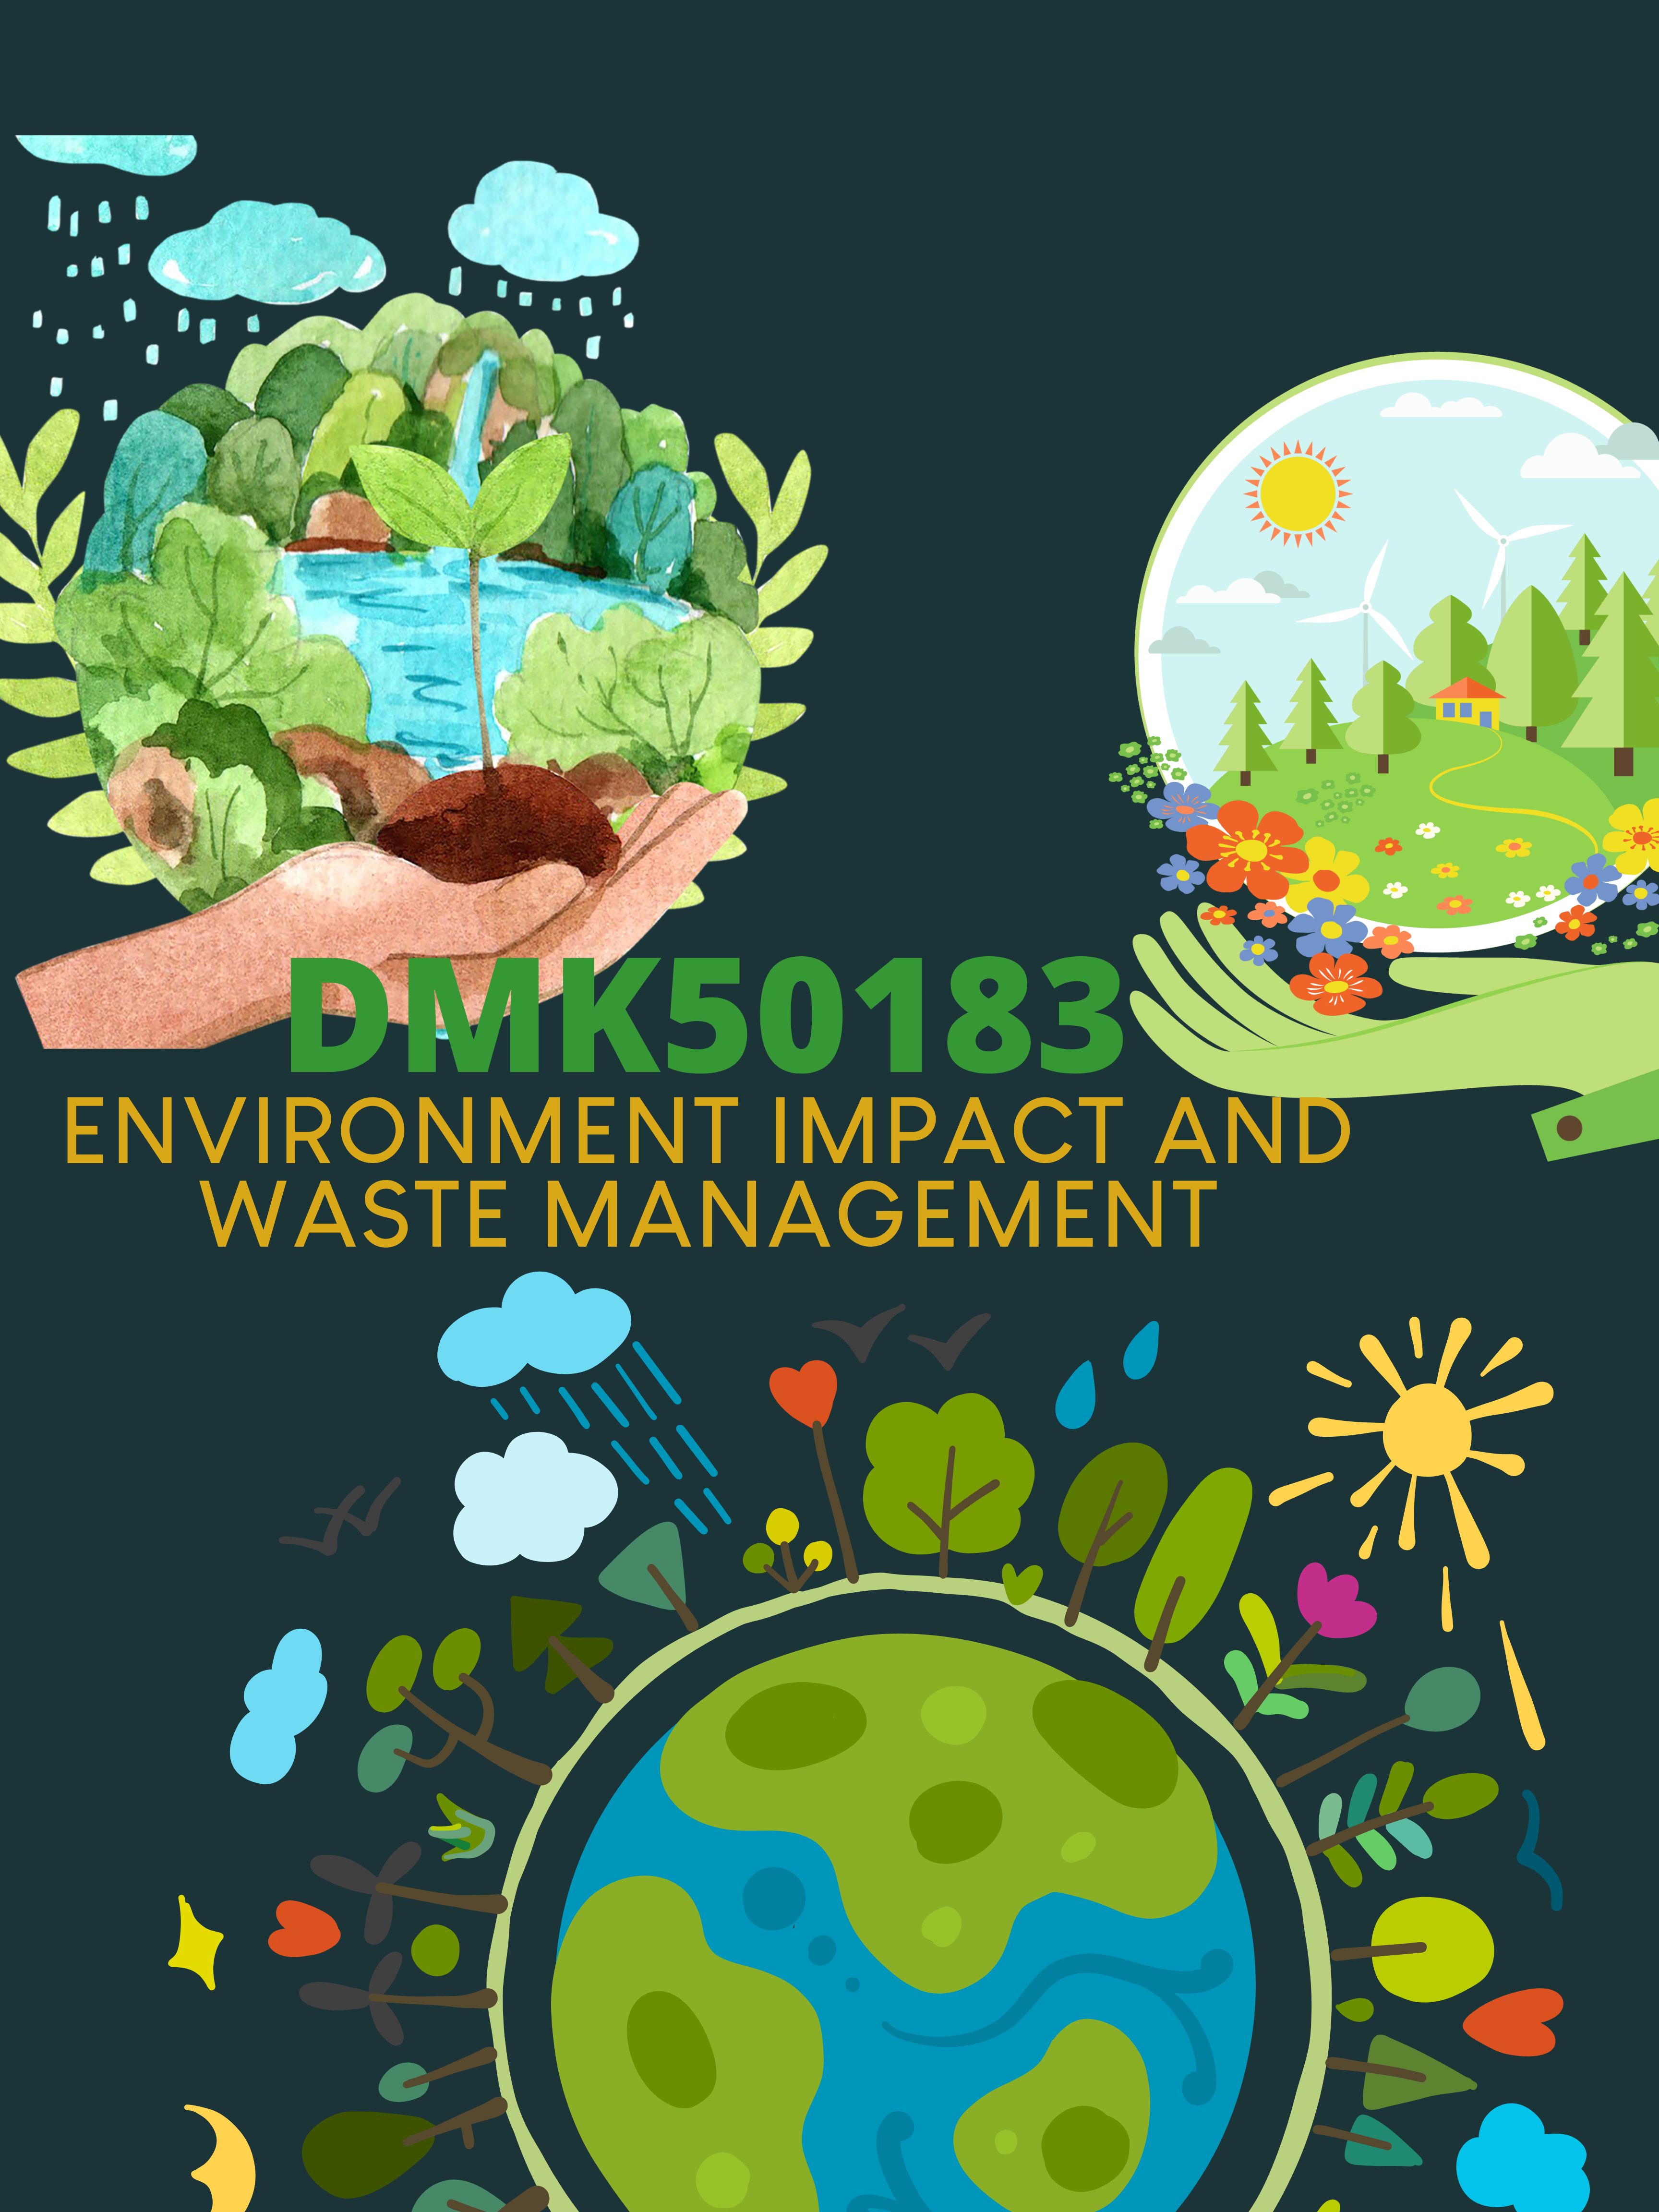 DMK50183 - ENVIRONMENT IMPACT AND WASTE MANAGEMENT